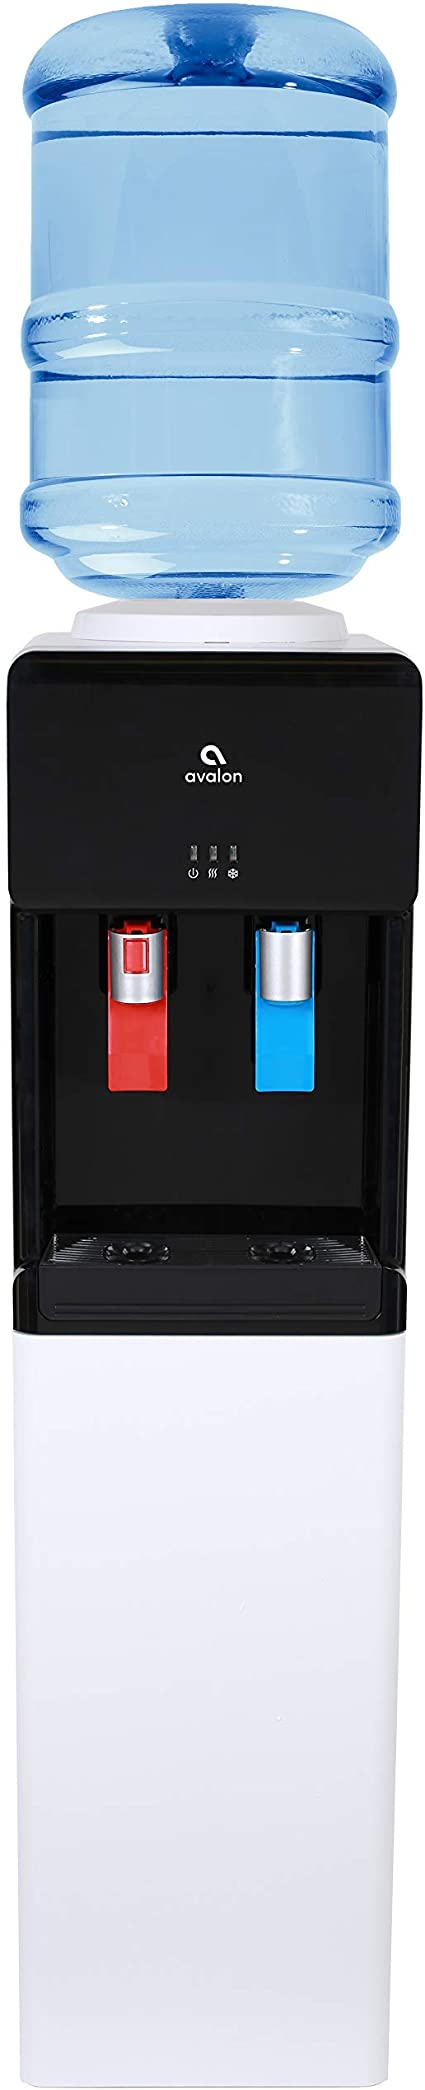 Avalon Top Loading Water Cooler Dispenser - Hot & Cold Water, Child Safety Lock, Innovative Ultra Slim Design, Holds 3 or 5 Gallon Bottles - UL/Energy Star Approved